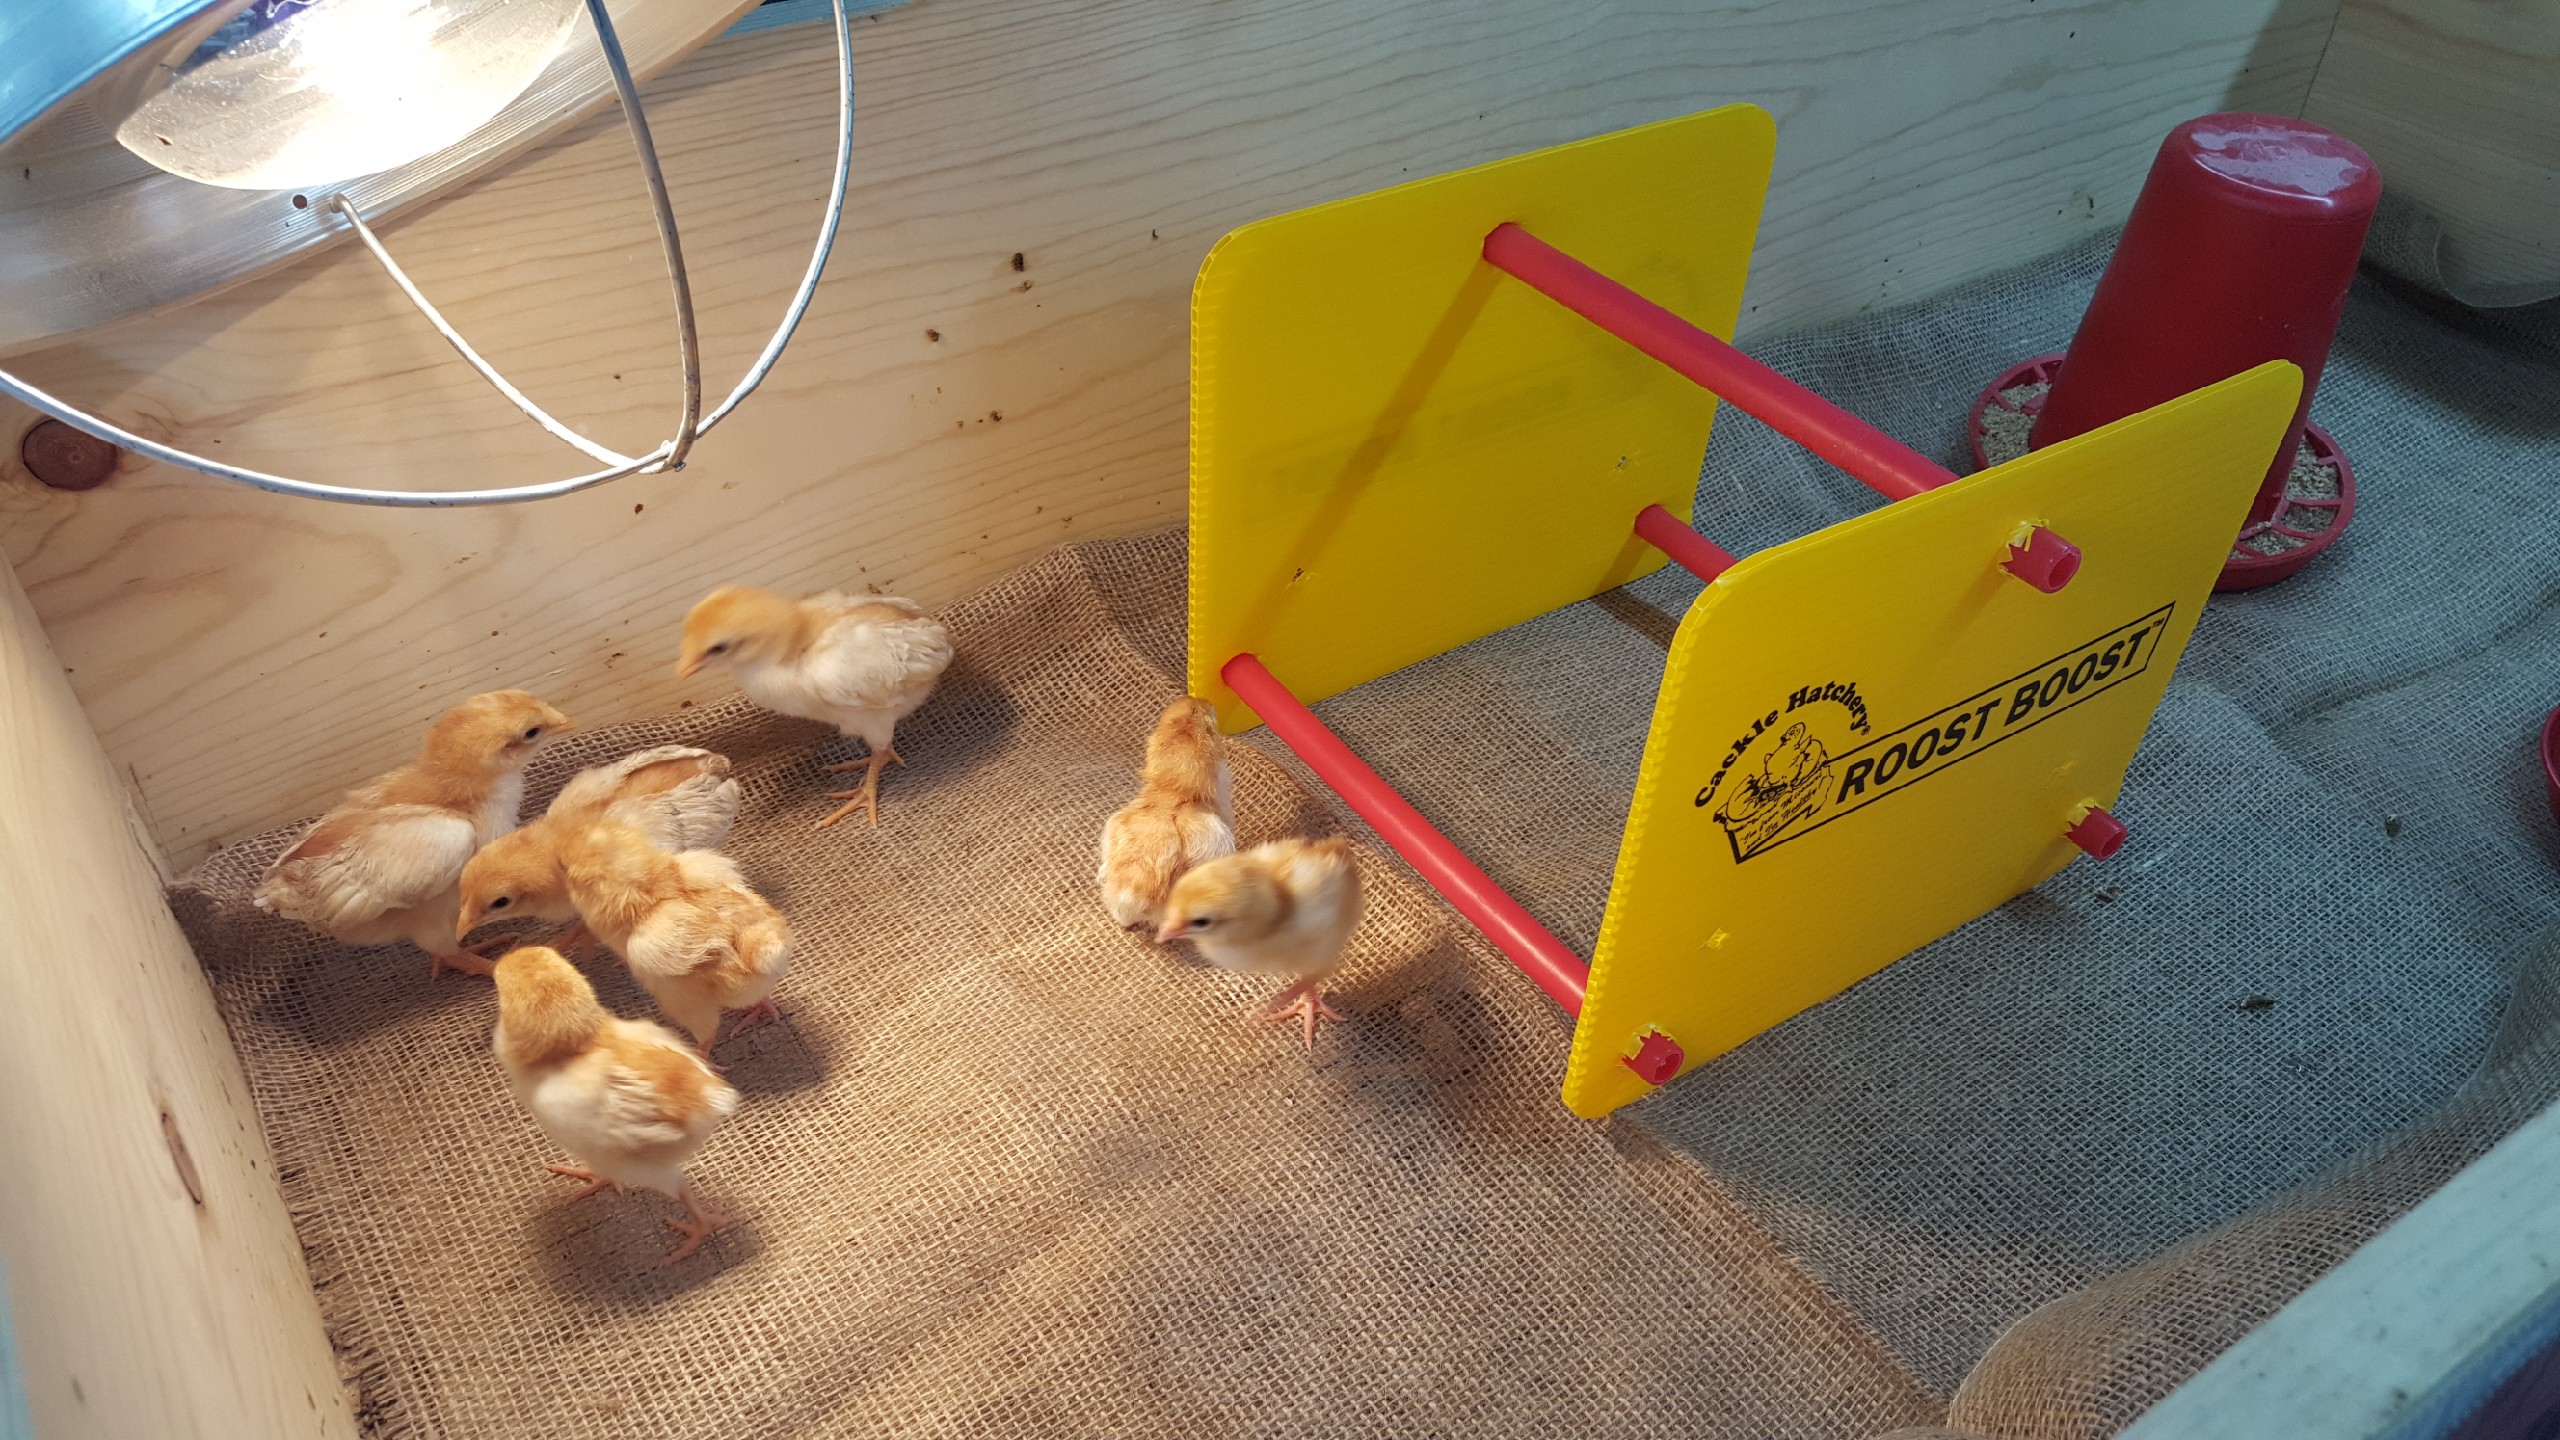 Cackle Hatchery Roost Boost Training Roost for Brooder Chicks